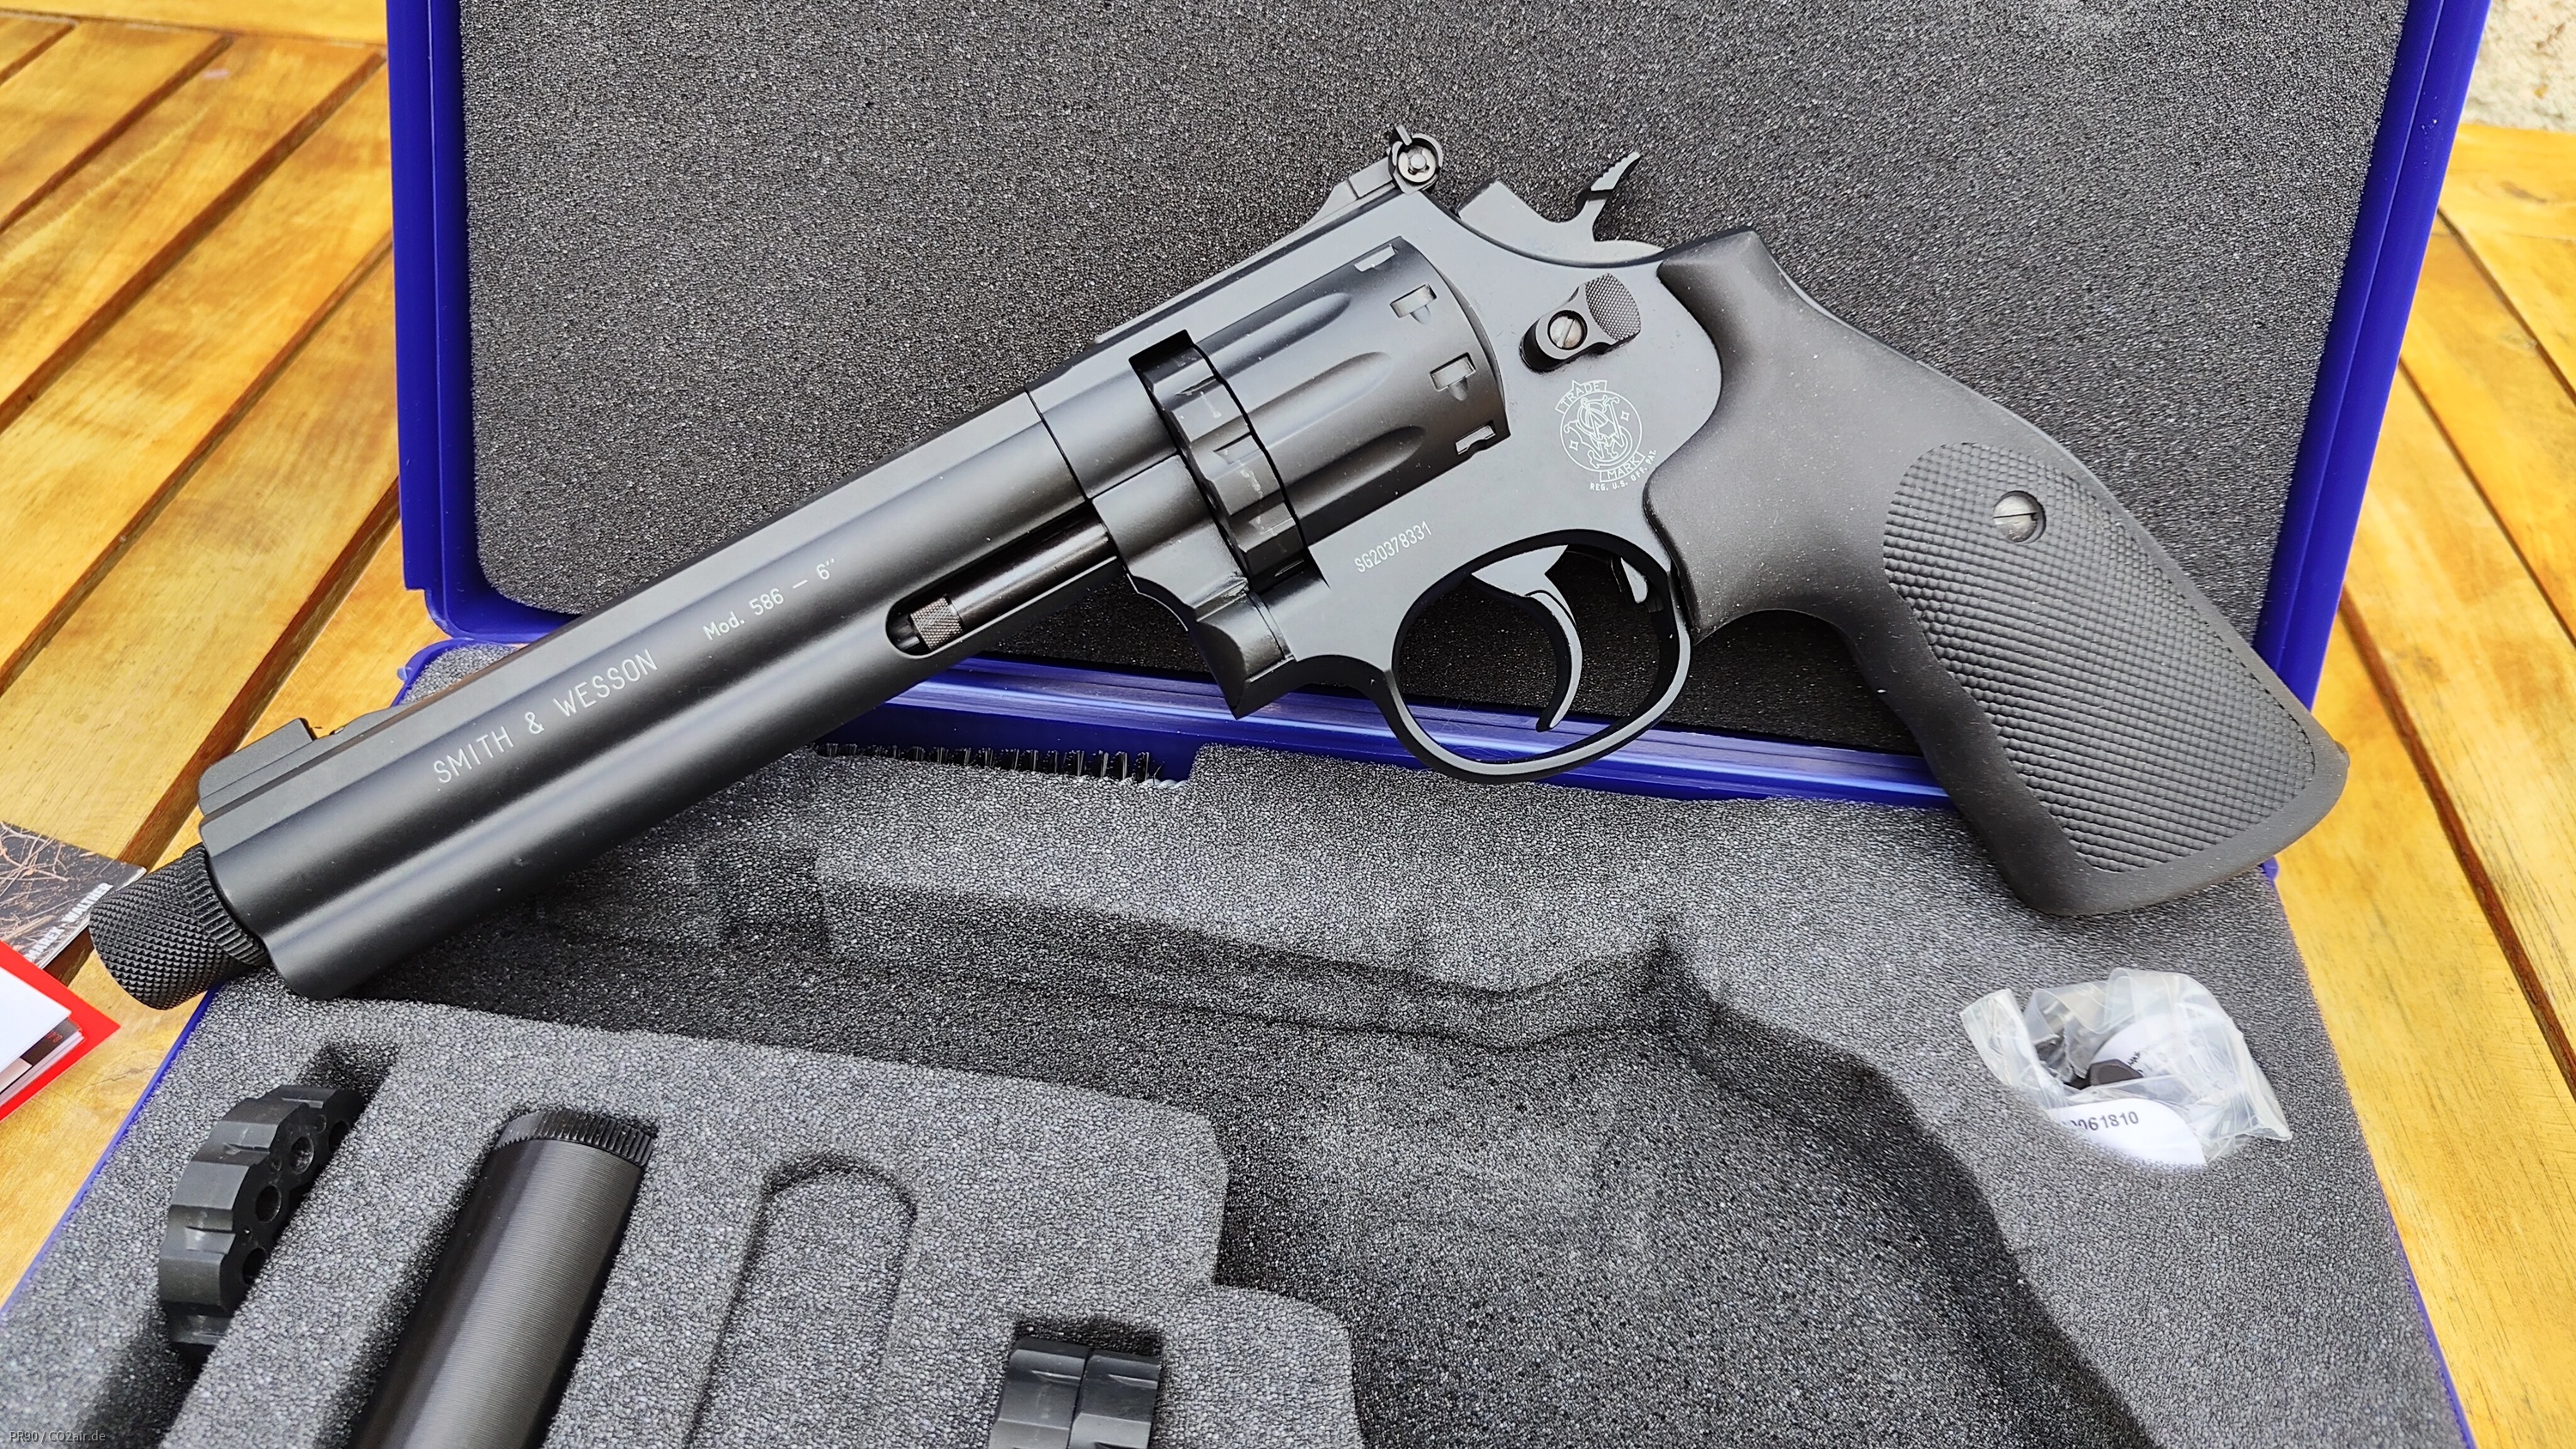 Smith & Wesson 586 6"